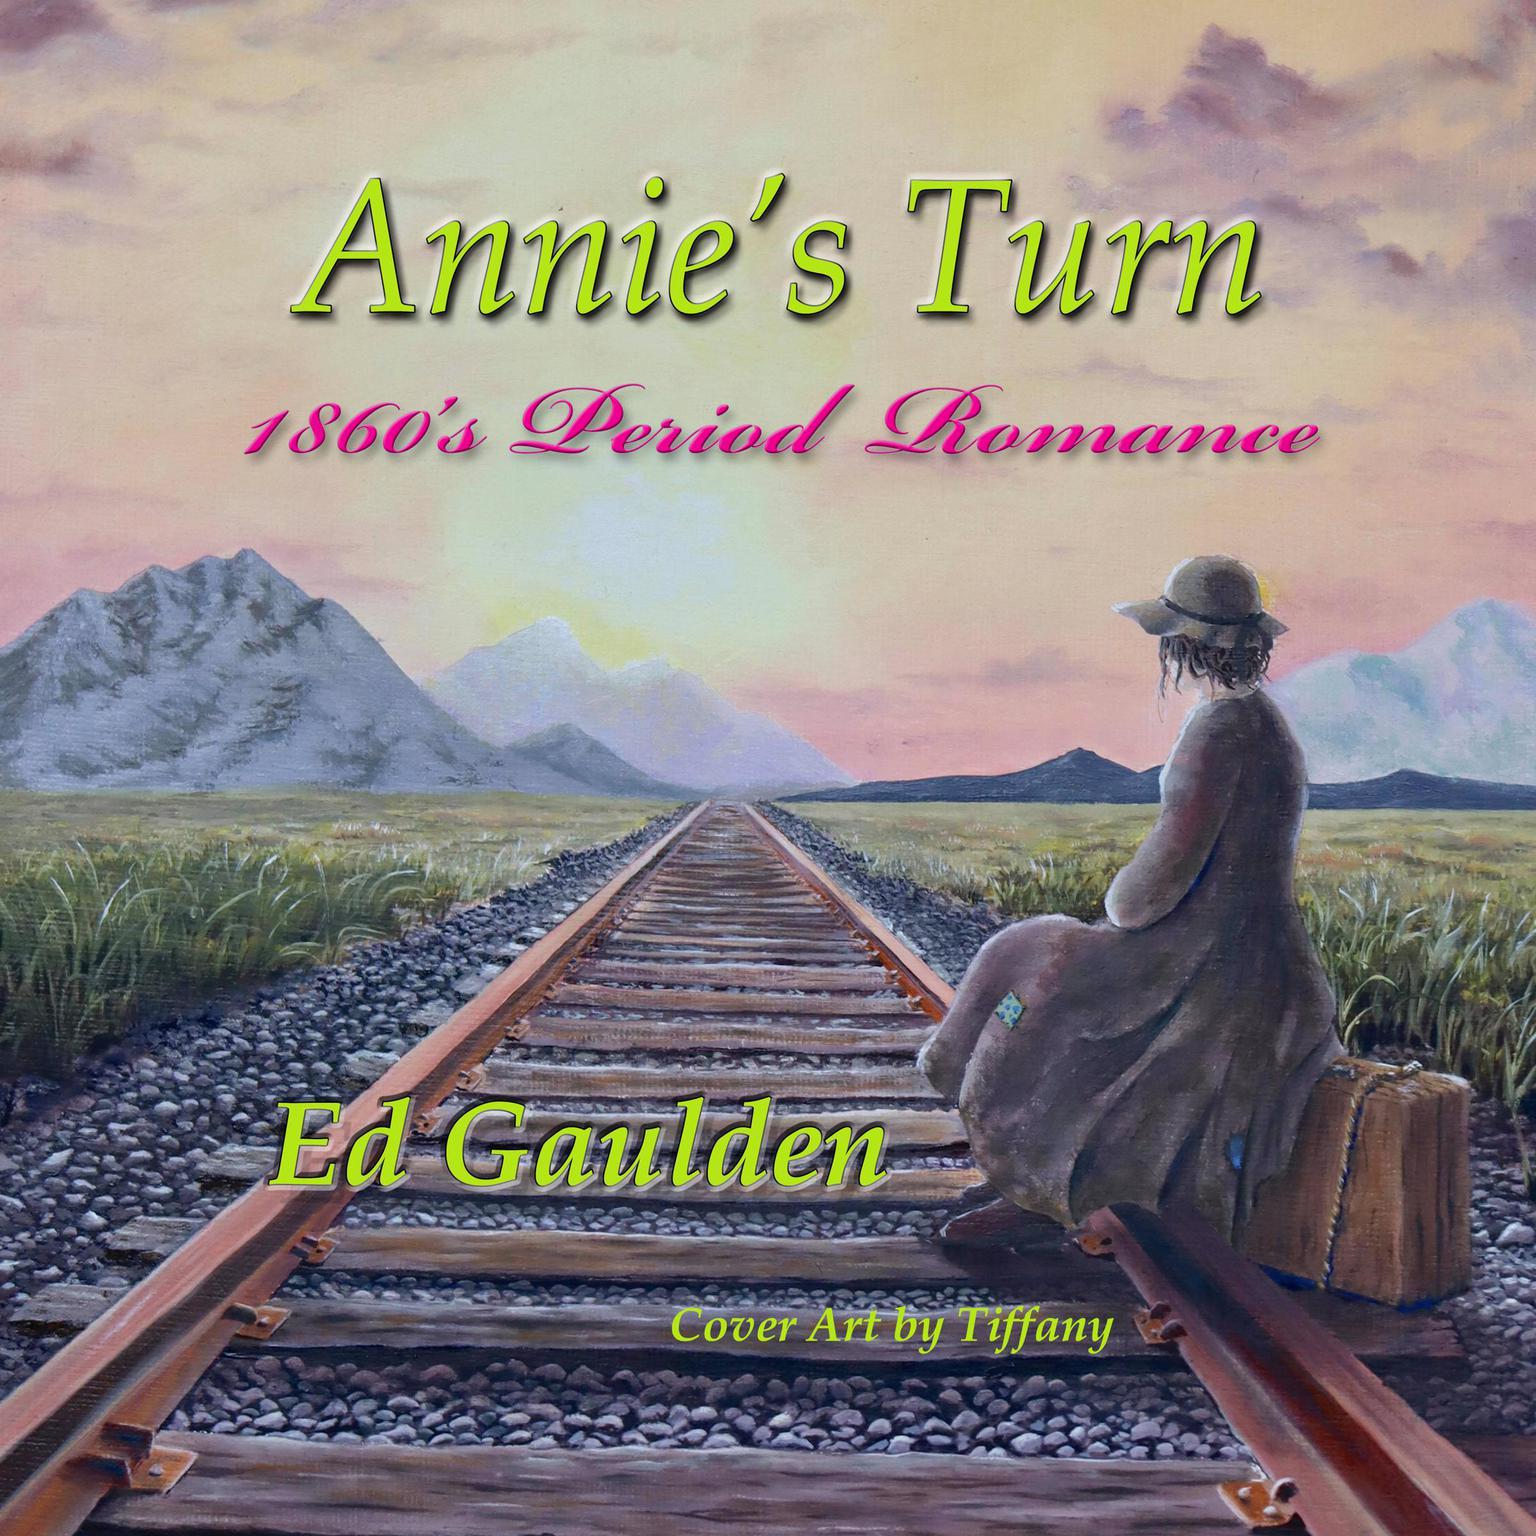 Annies Turn: An 1860s Romance  Audiobook, by Ed Gaulden